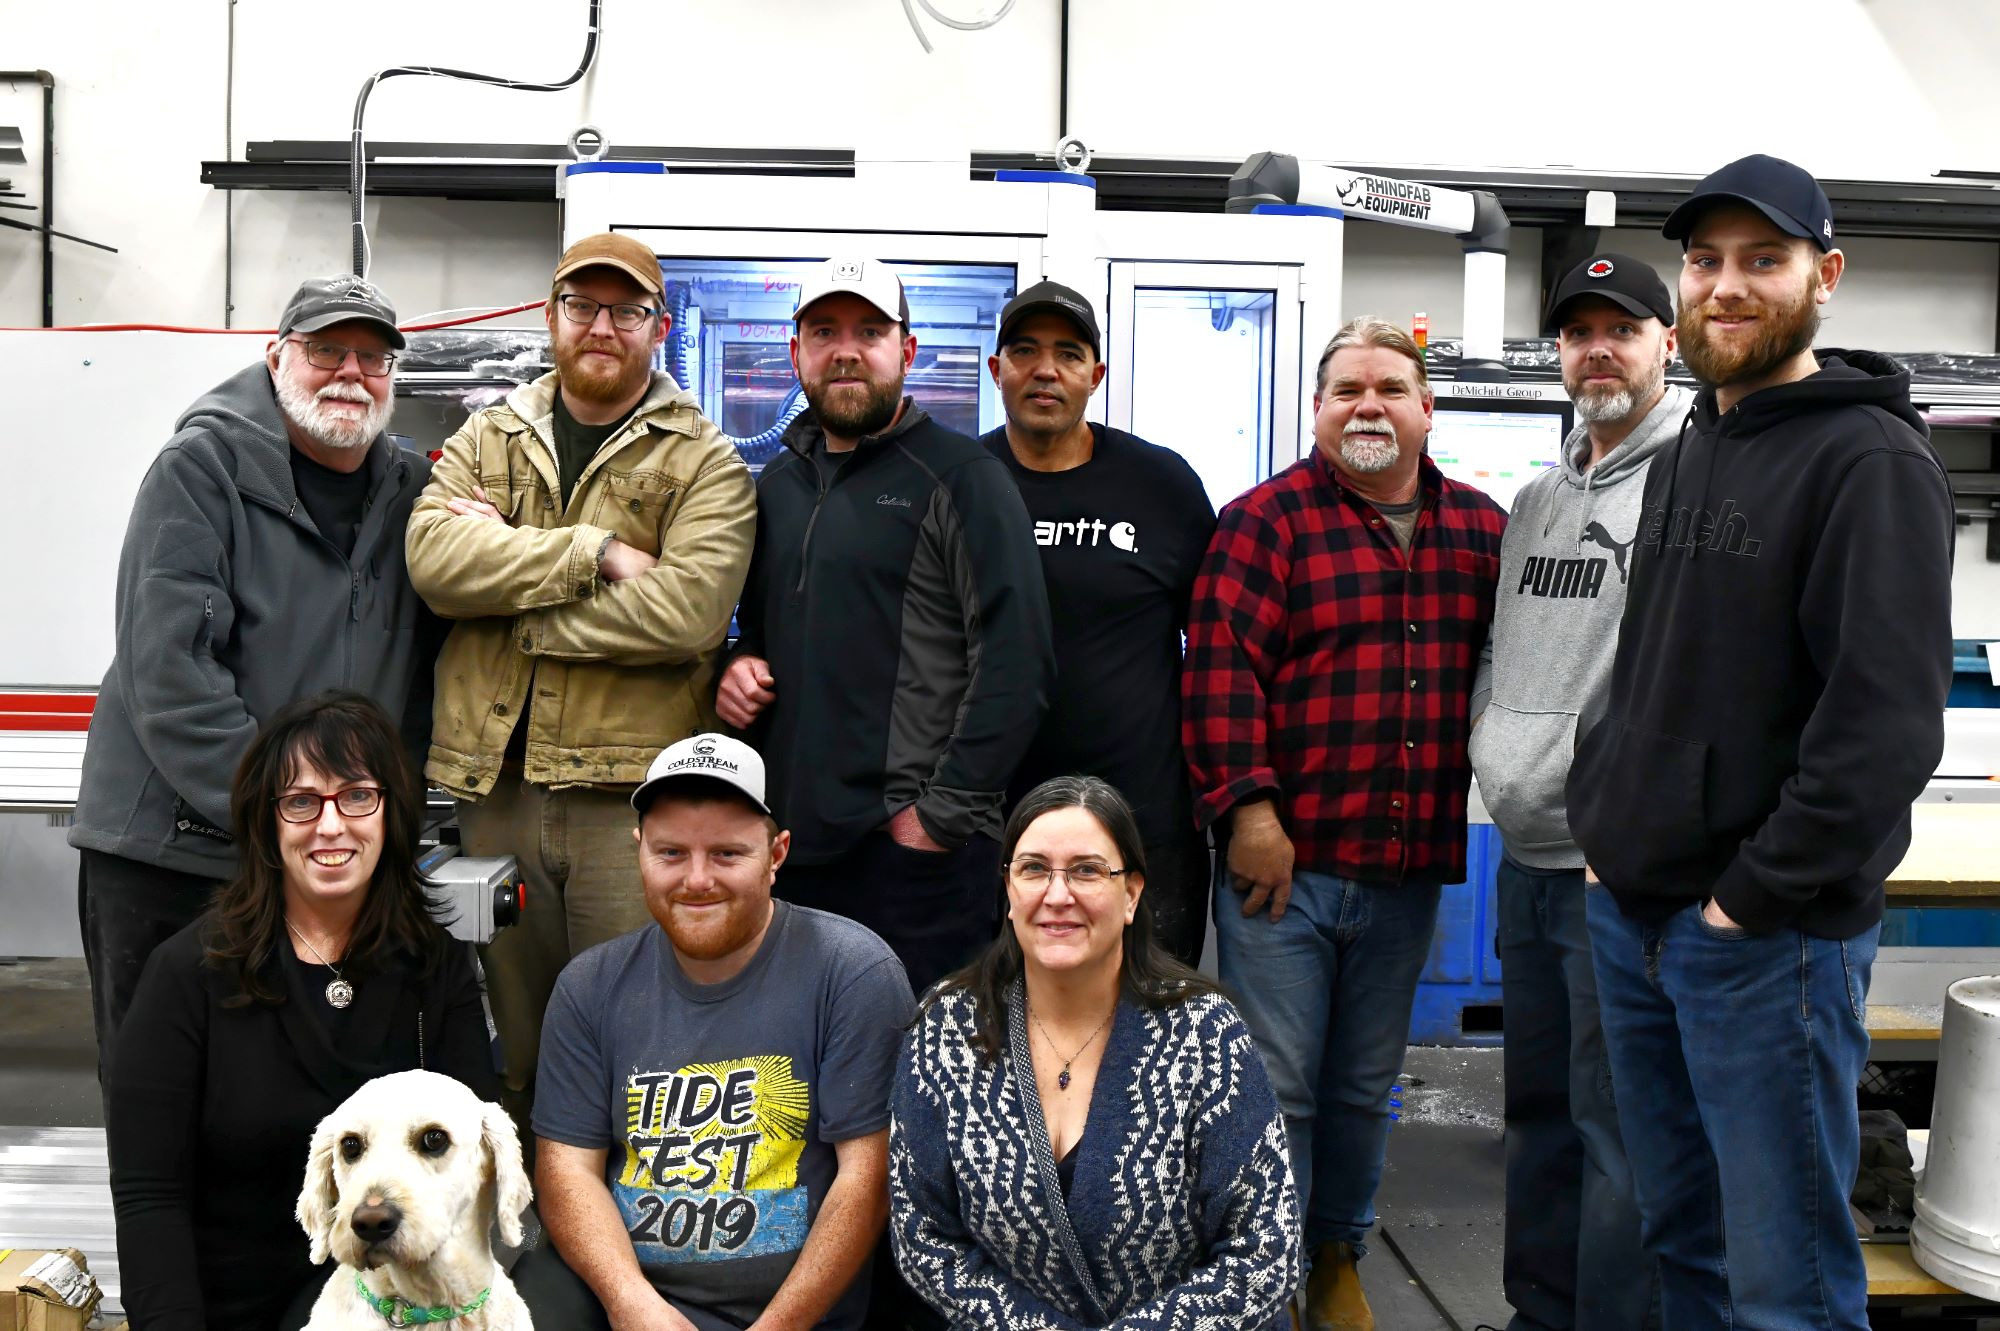 group of people and a dog pose in front of glass and aluminum equipment